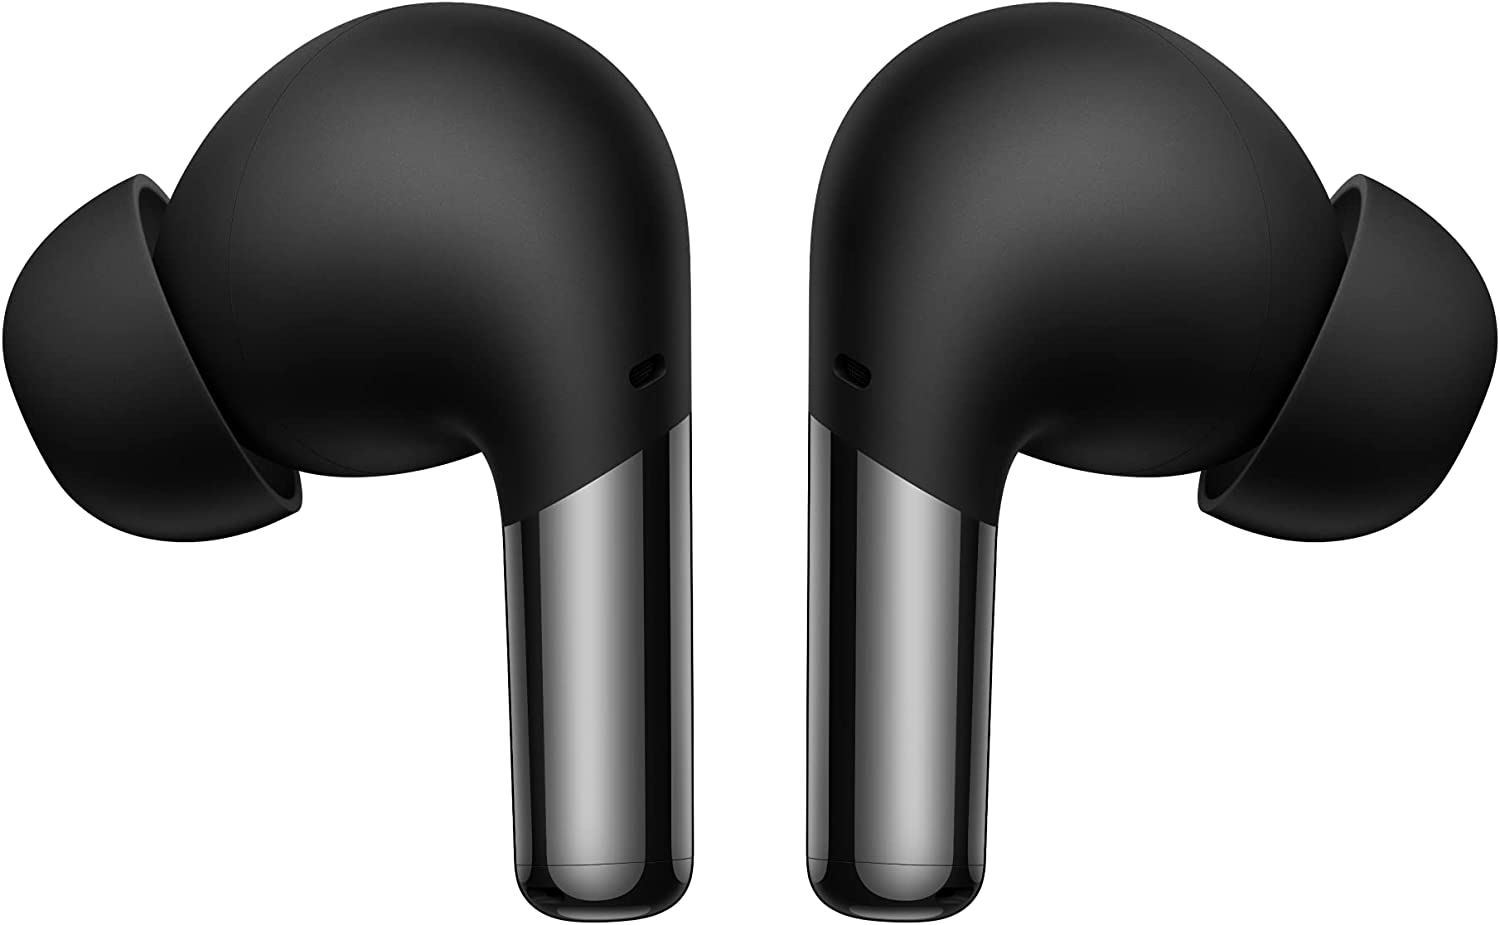 OnePlus Buds Pro - Wireless headphones with up to 38 Hours of battery life and Smart Adaptive Noise Cancellation - Matte Black